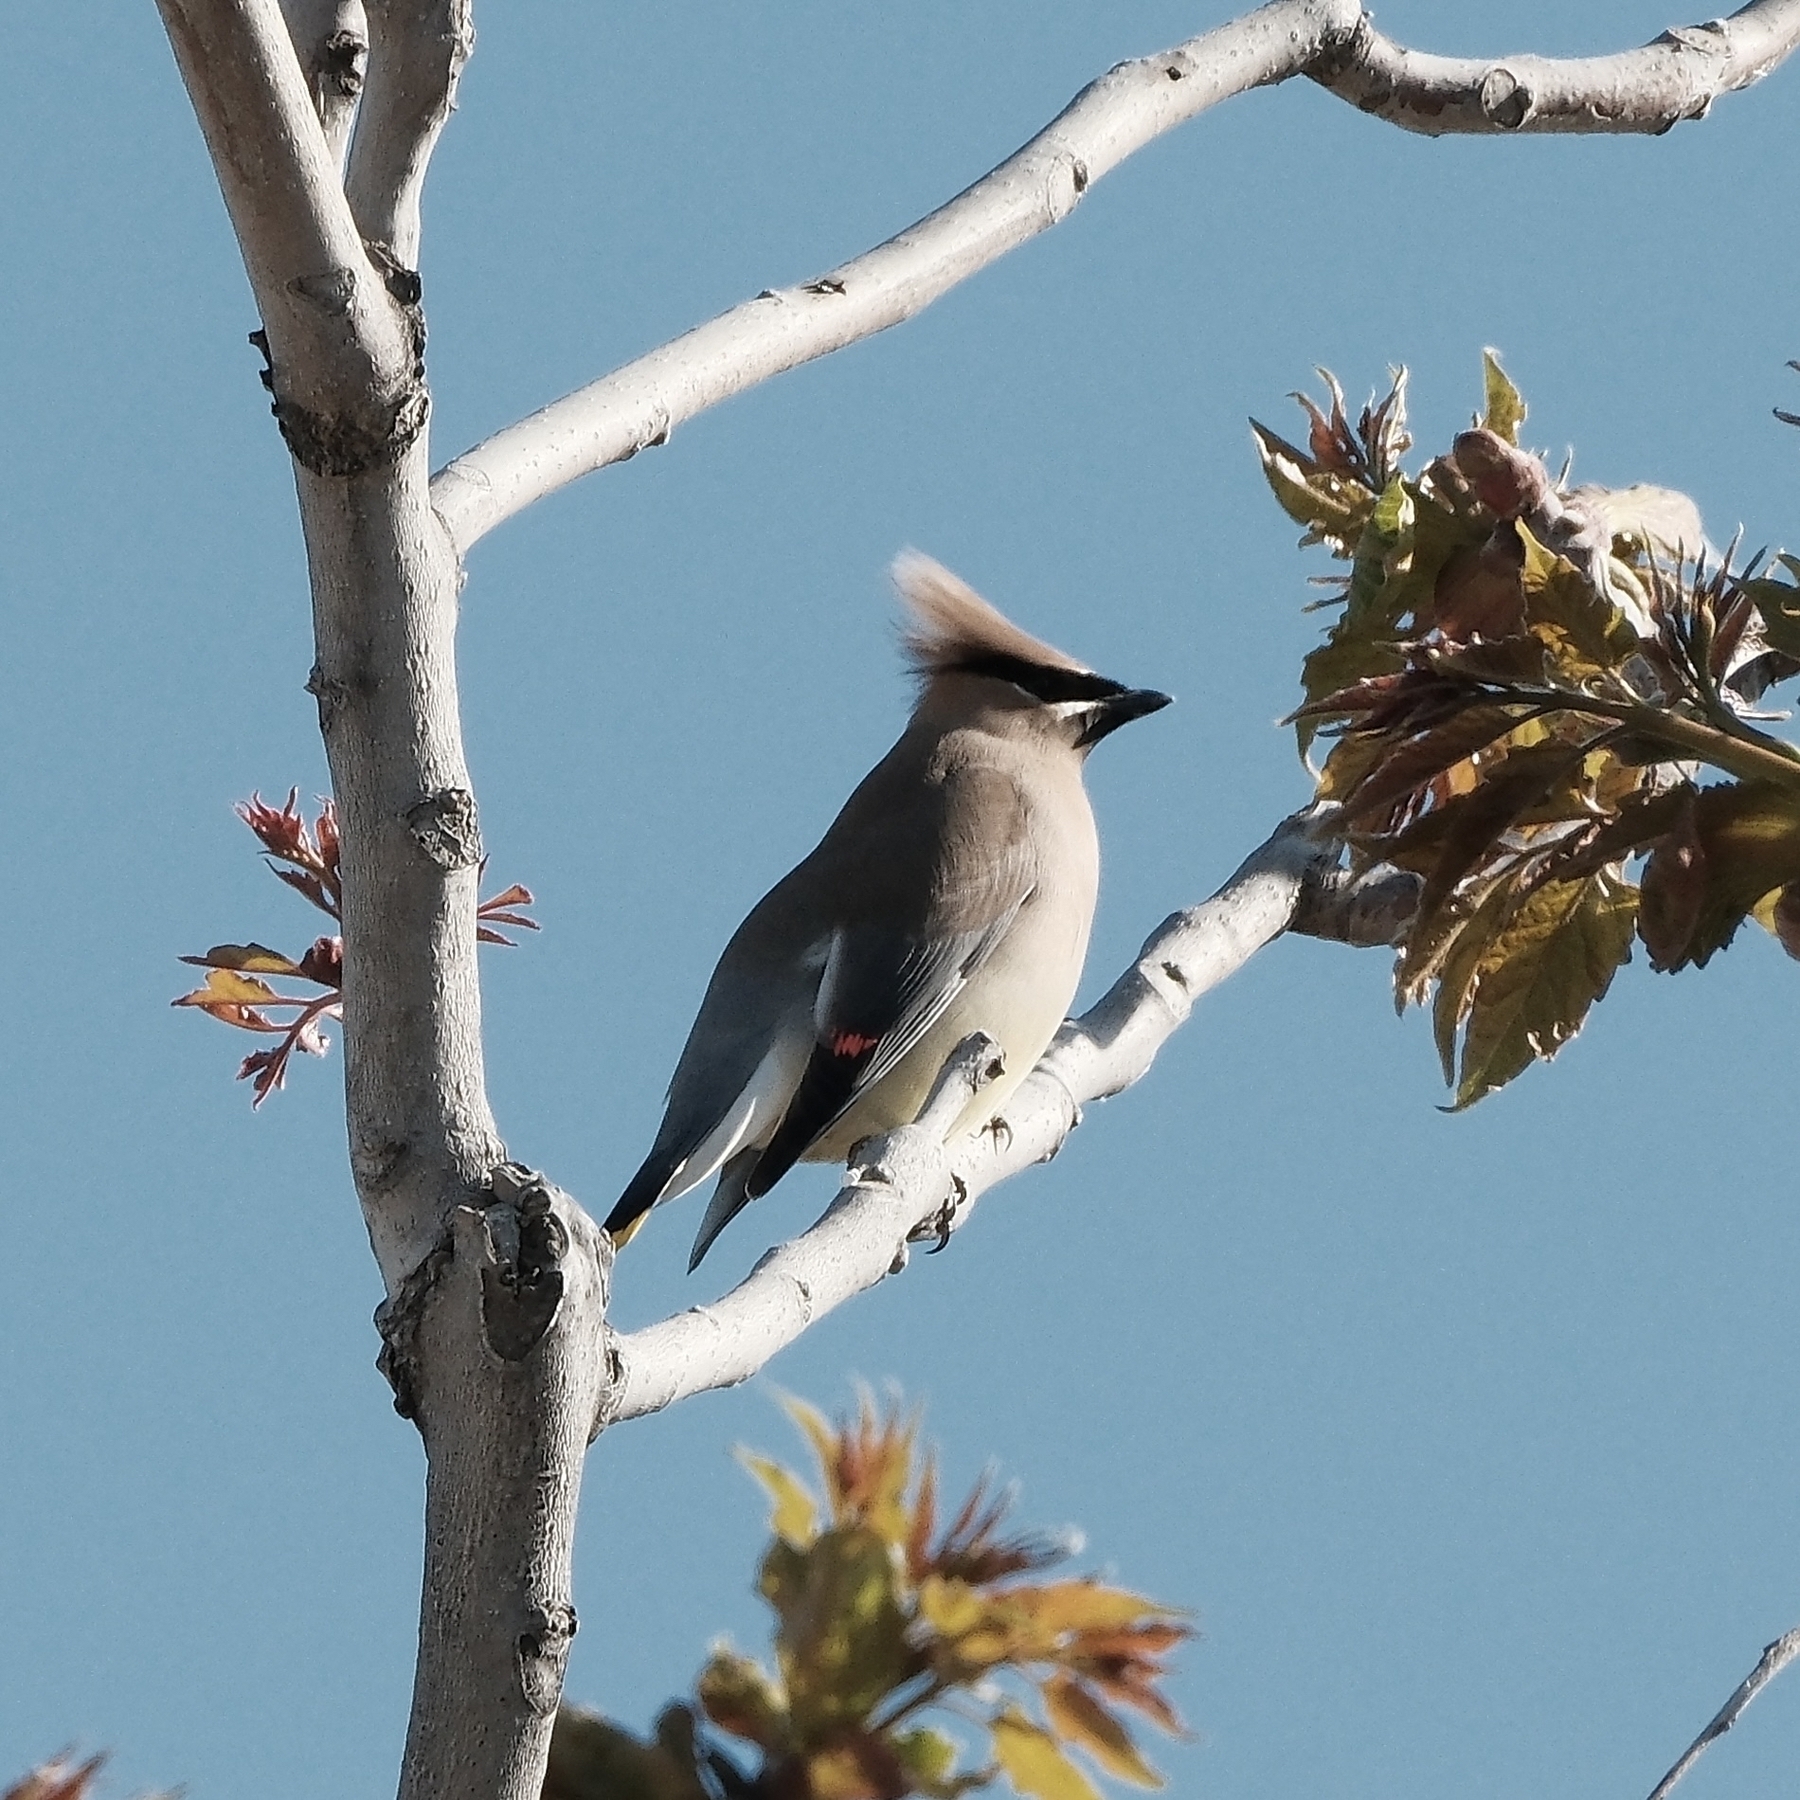 This Cedar Waxwing has a black mask that extends from its eyes to its chin, with a crest of feathers on its head. Its wings and tail are brown with yellow and white accents, and its tail has a bright yellow tip. The Cedar Waxwing's most distinctive feature is its red-tipped wings. It’s on a budding tree with a blue sky.